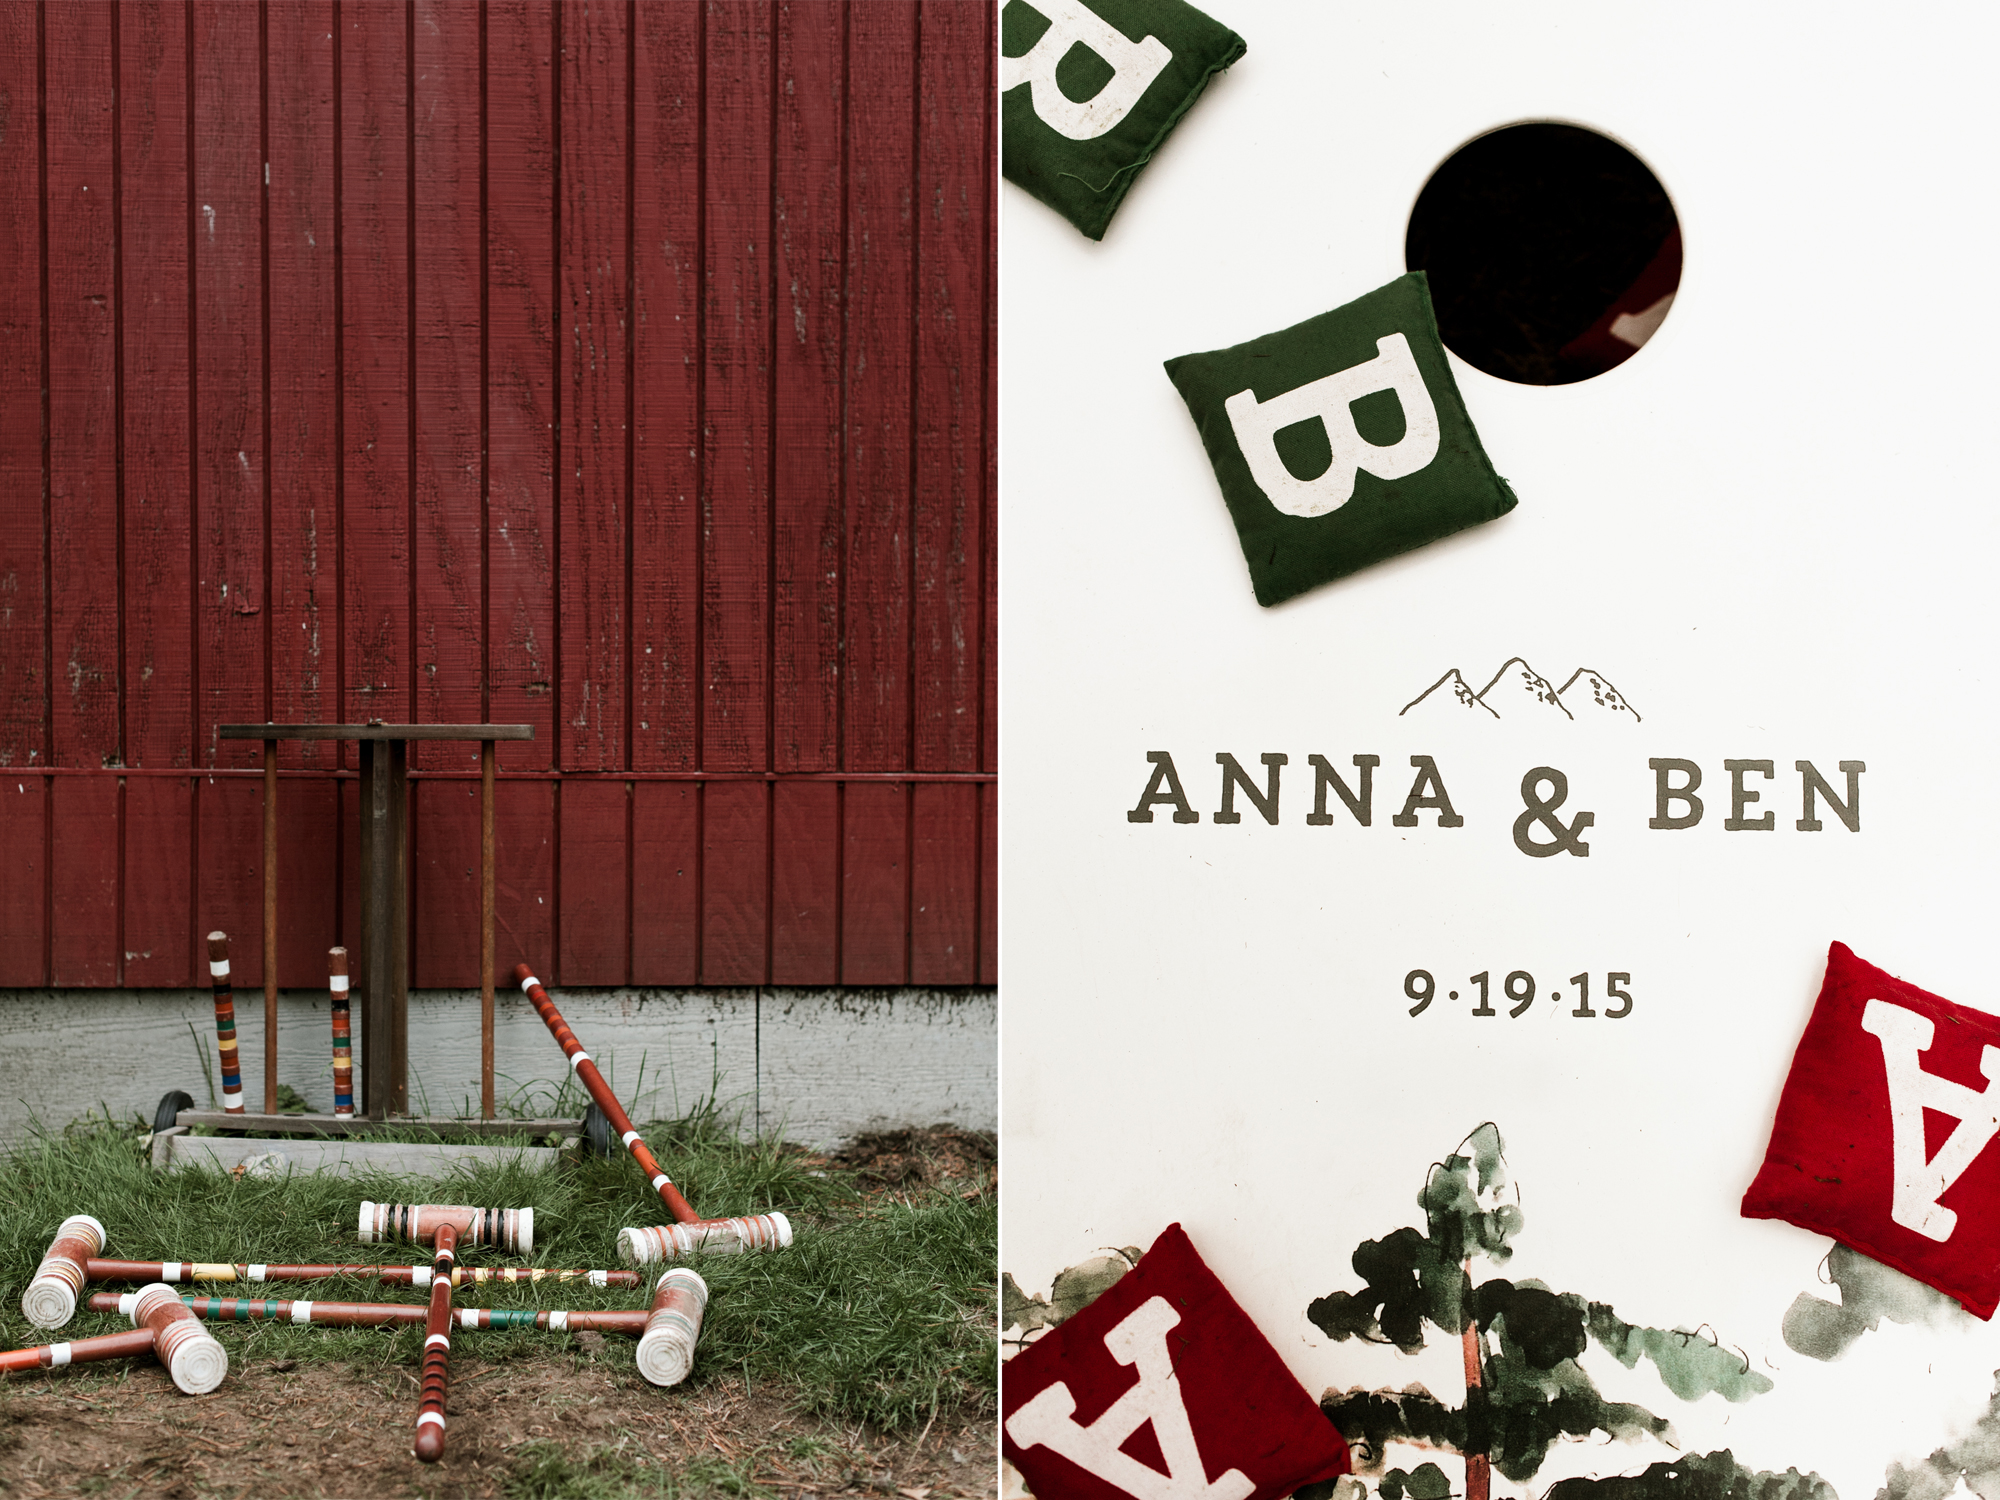 Custom lawn games for Anna and Ben's wedding. By Sou'Wester wedding photographer Briana Morrison